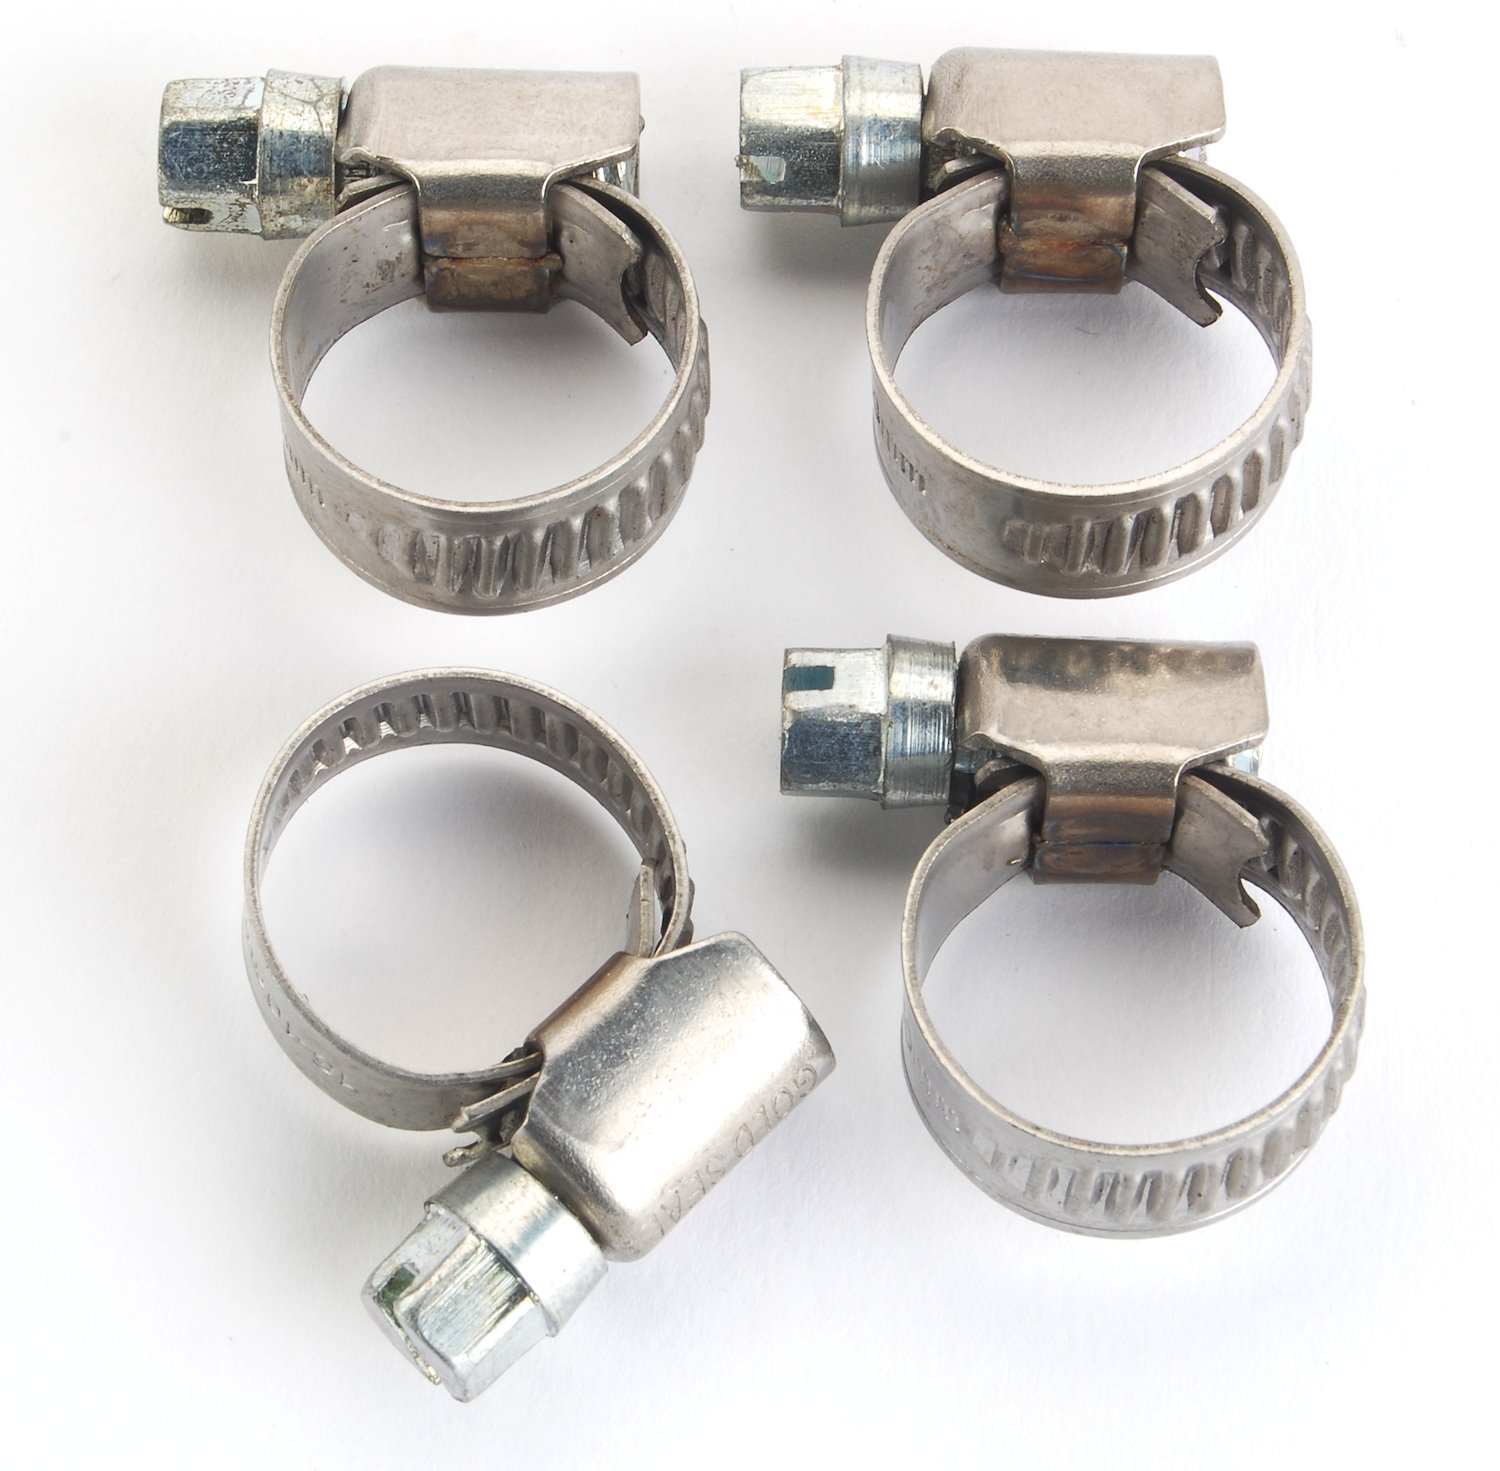 Stainless Steel Hose Clamps 3/8 in. to 5/8